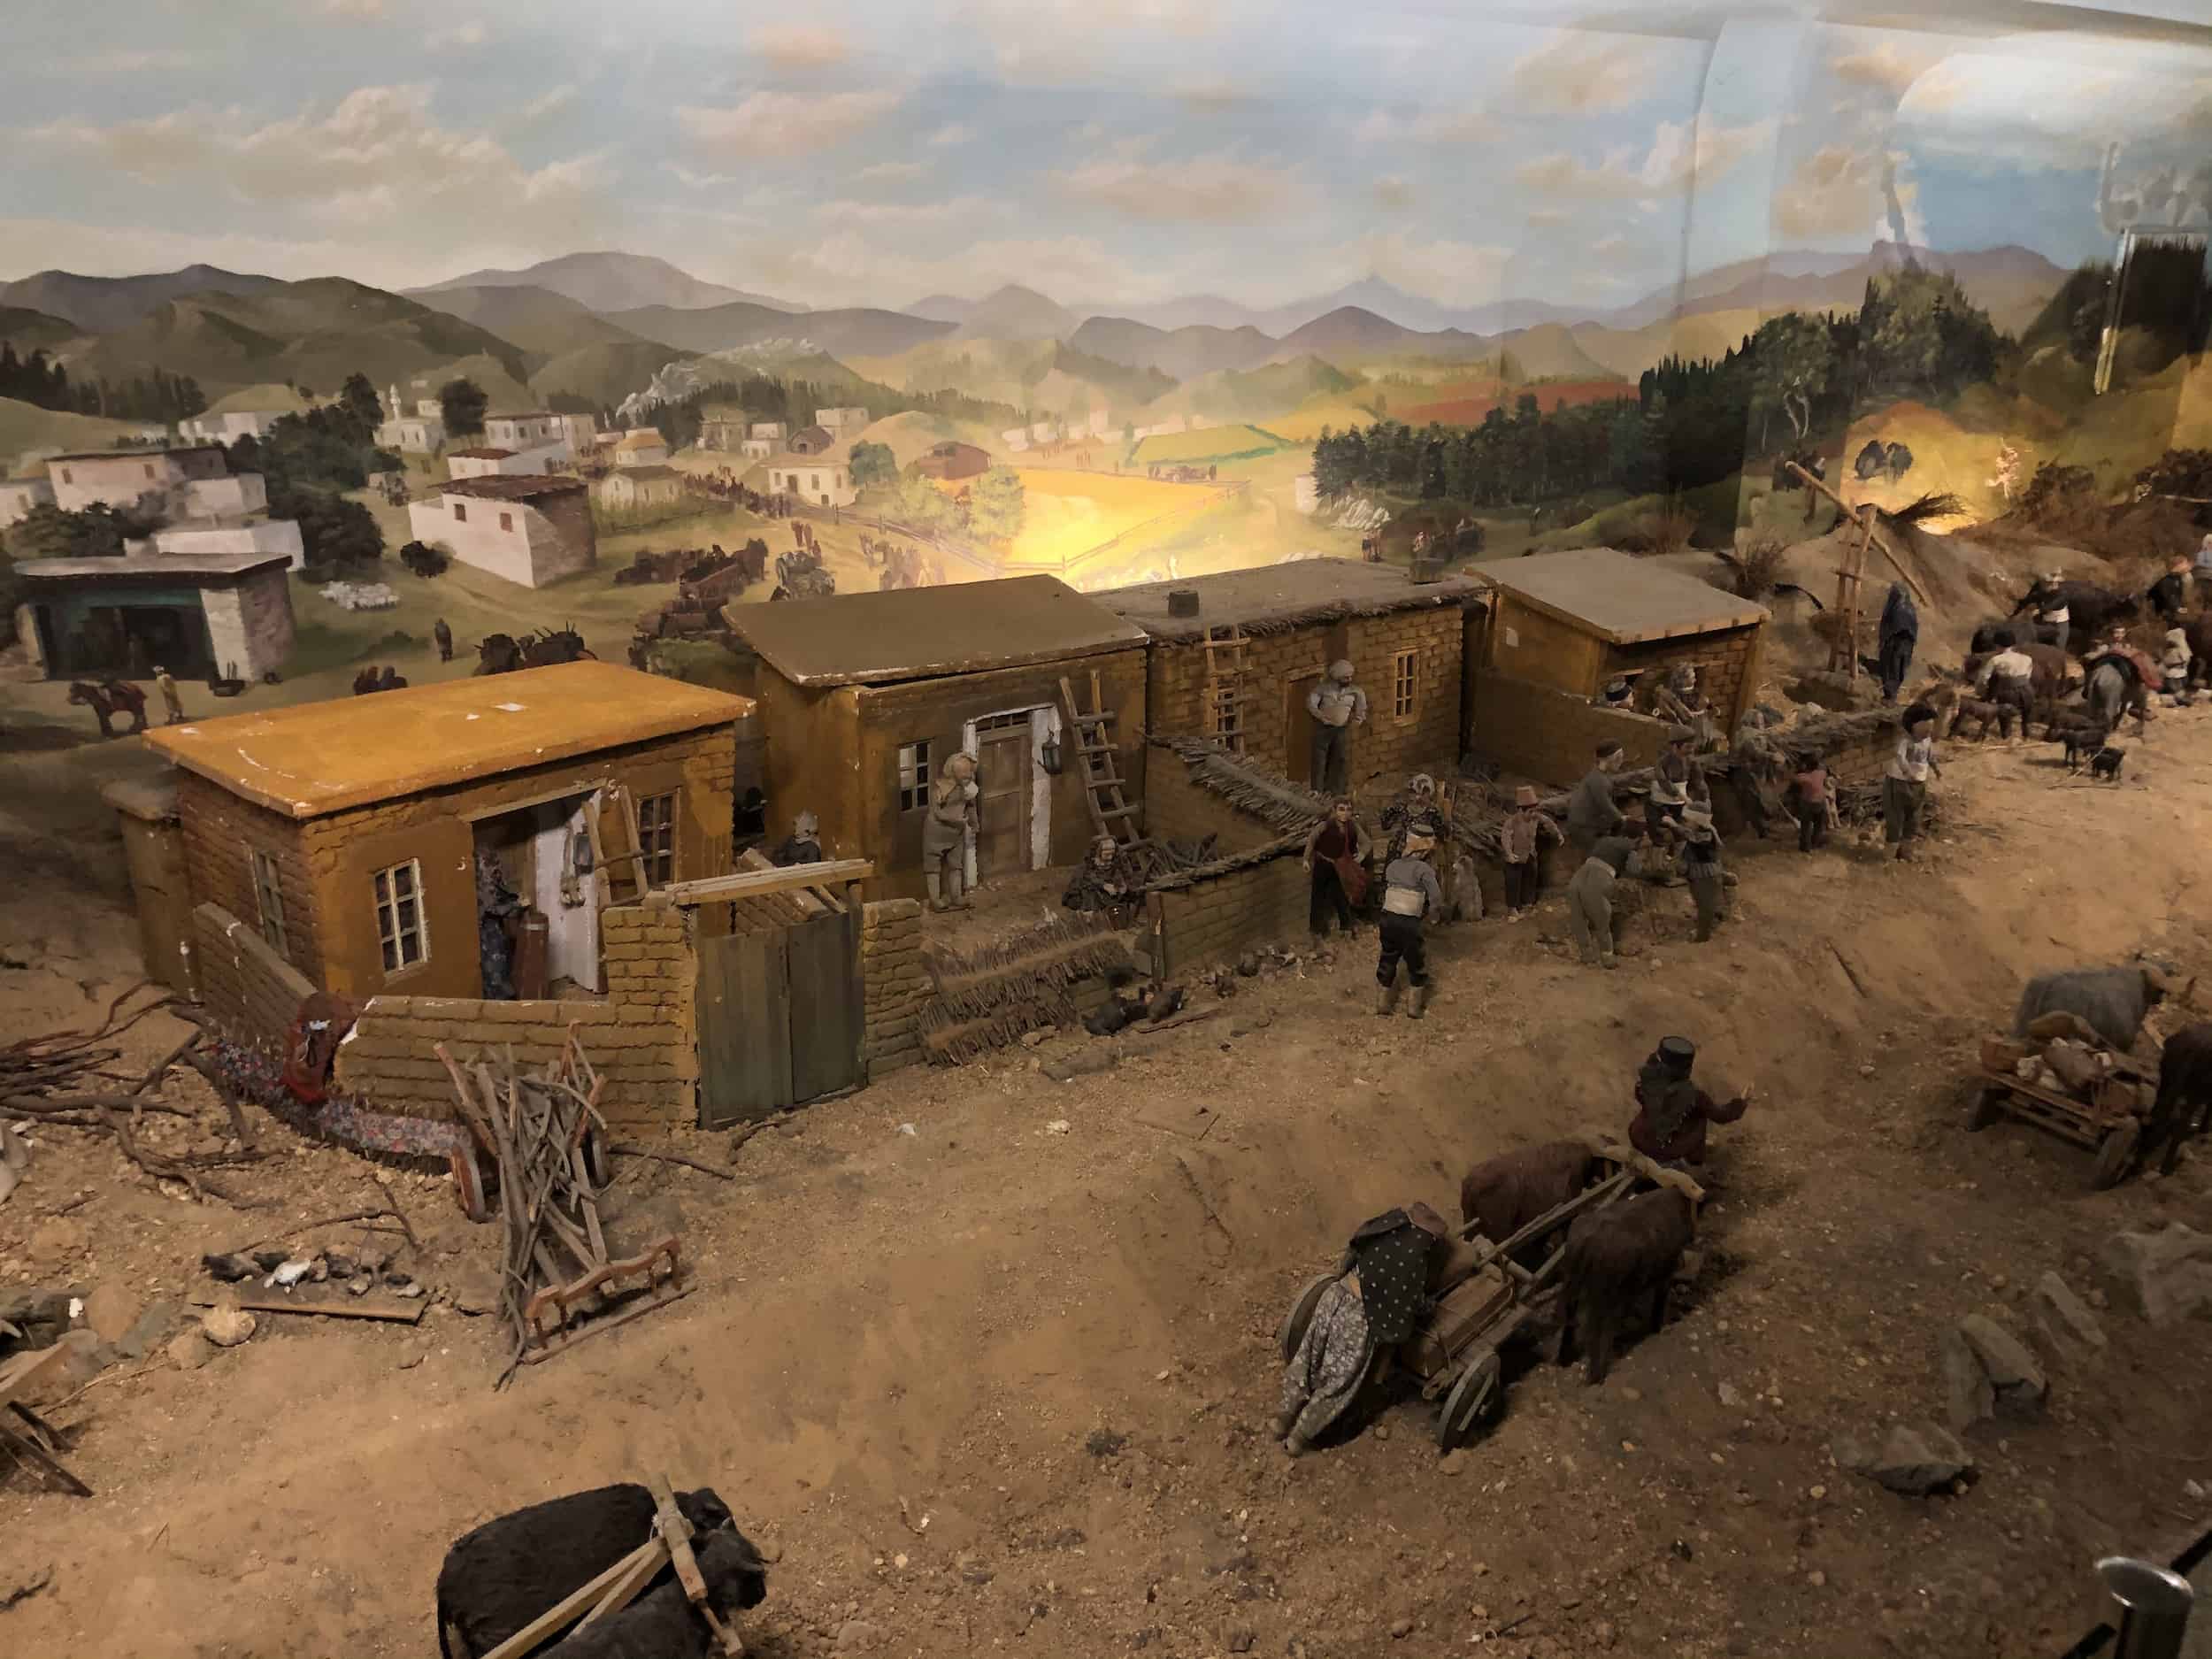 Village scene in the Victory Museum